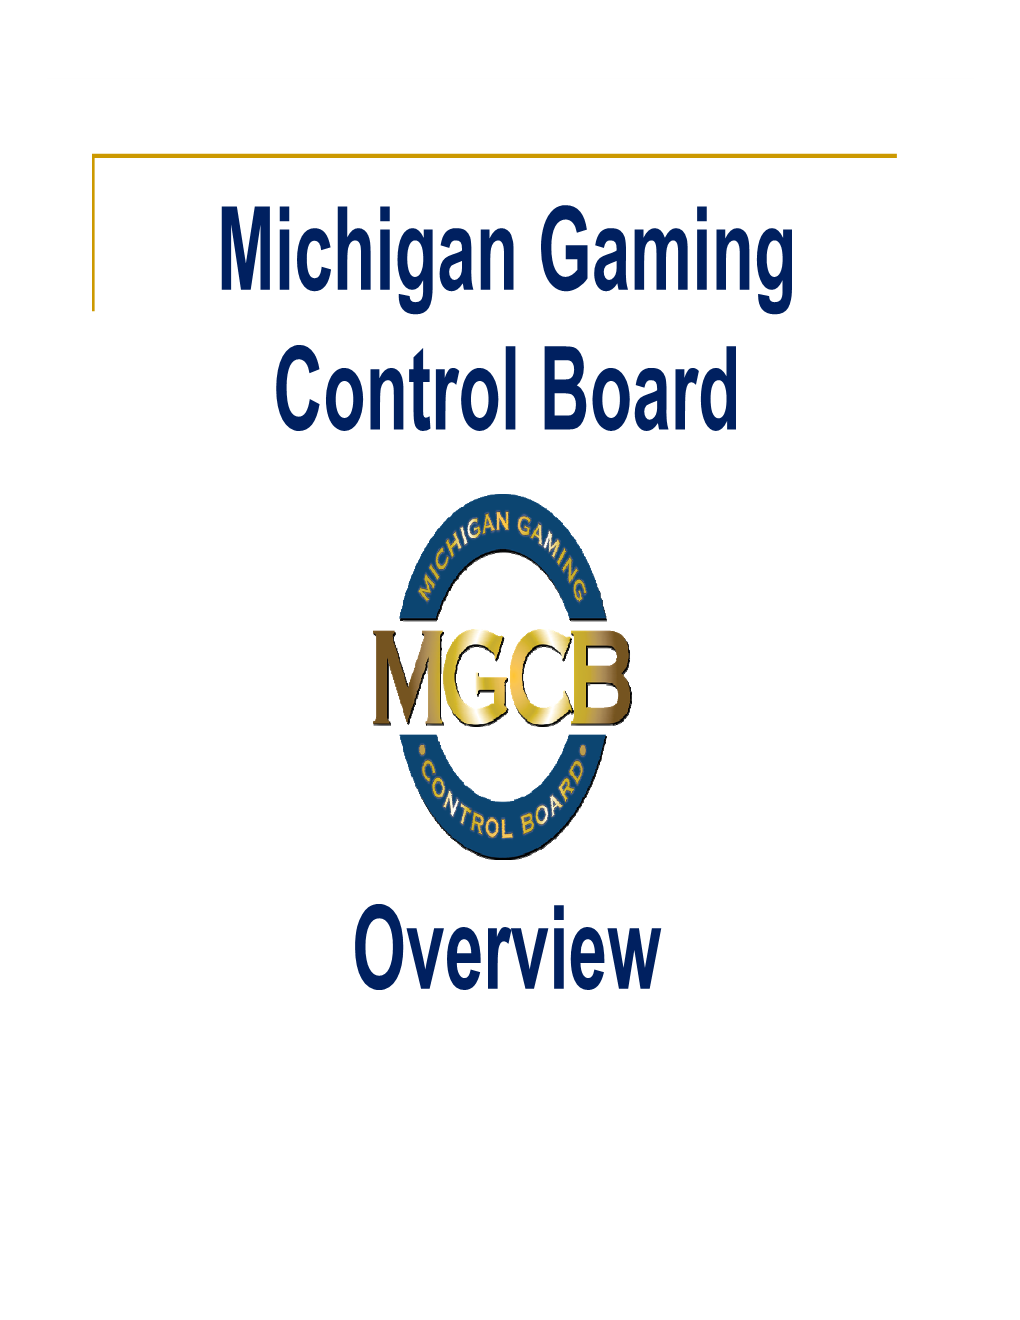 Michigan Gaming Control Board Overview